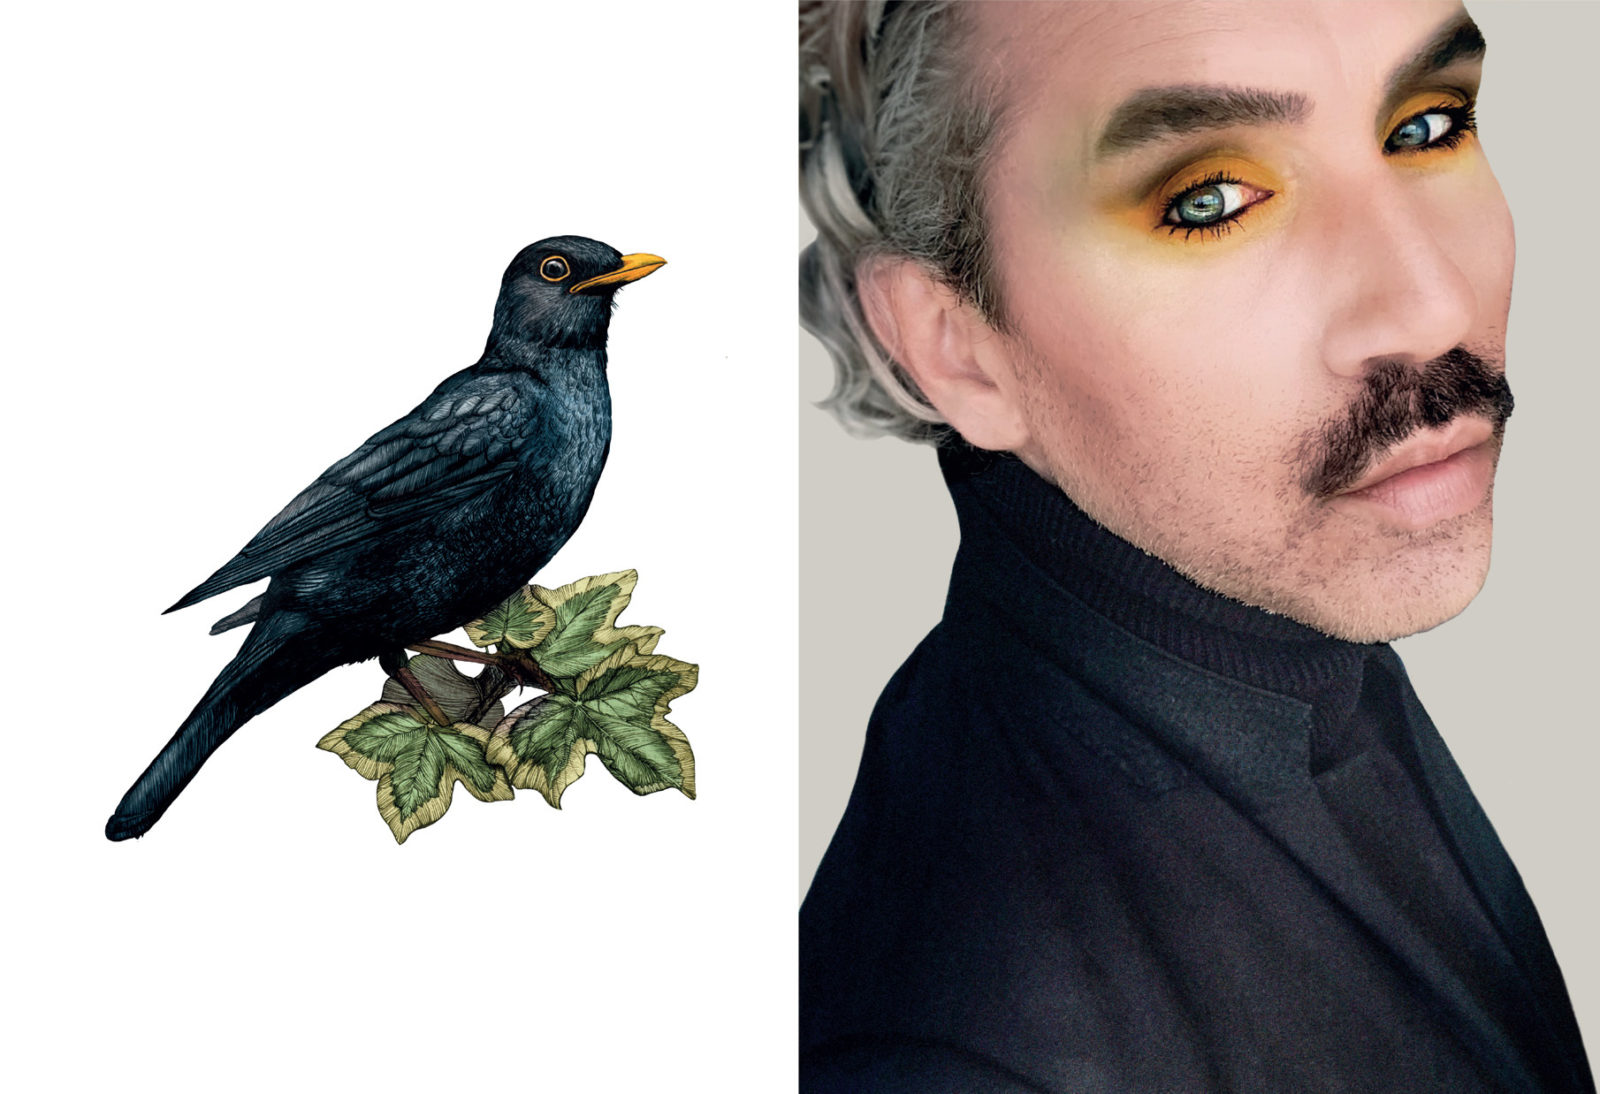 Paul Harfleet is photographed dressed up as a Blackbird. He wears a black polar neck jumper and a black blazer. His hair is medium length, grey and Curley and is slicked back out of his face. His eye shadow is orange. Next to him is a detailed illustration of a Blackbird.